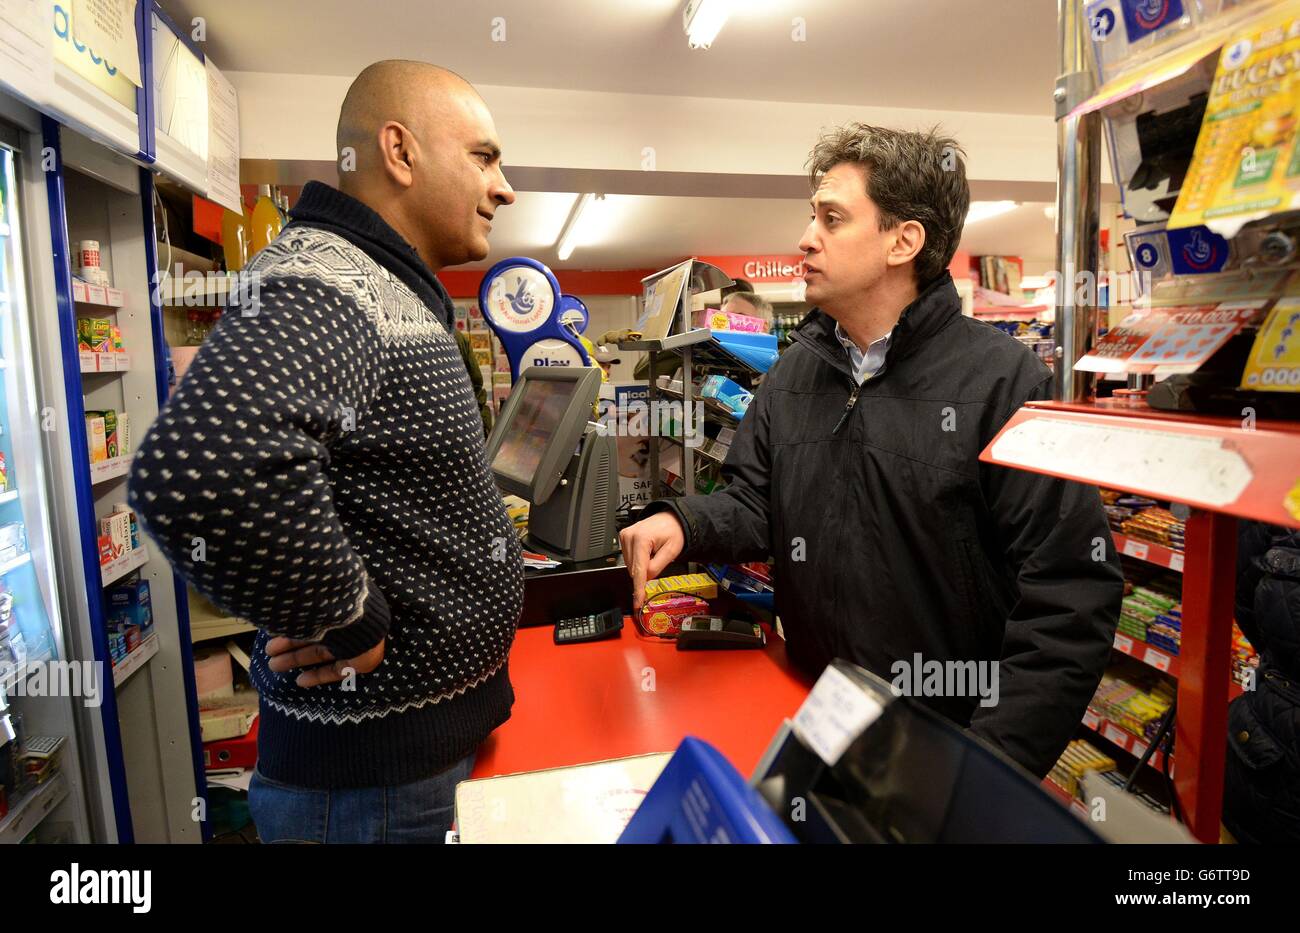 Labour leader Ed Miliband (right) speaks with a local shop owner during a visit to view recent flooding in Purley on Thames in Berkshire. Stock Photo